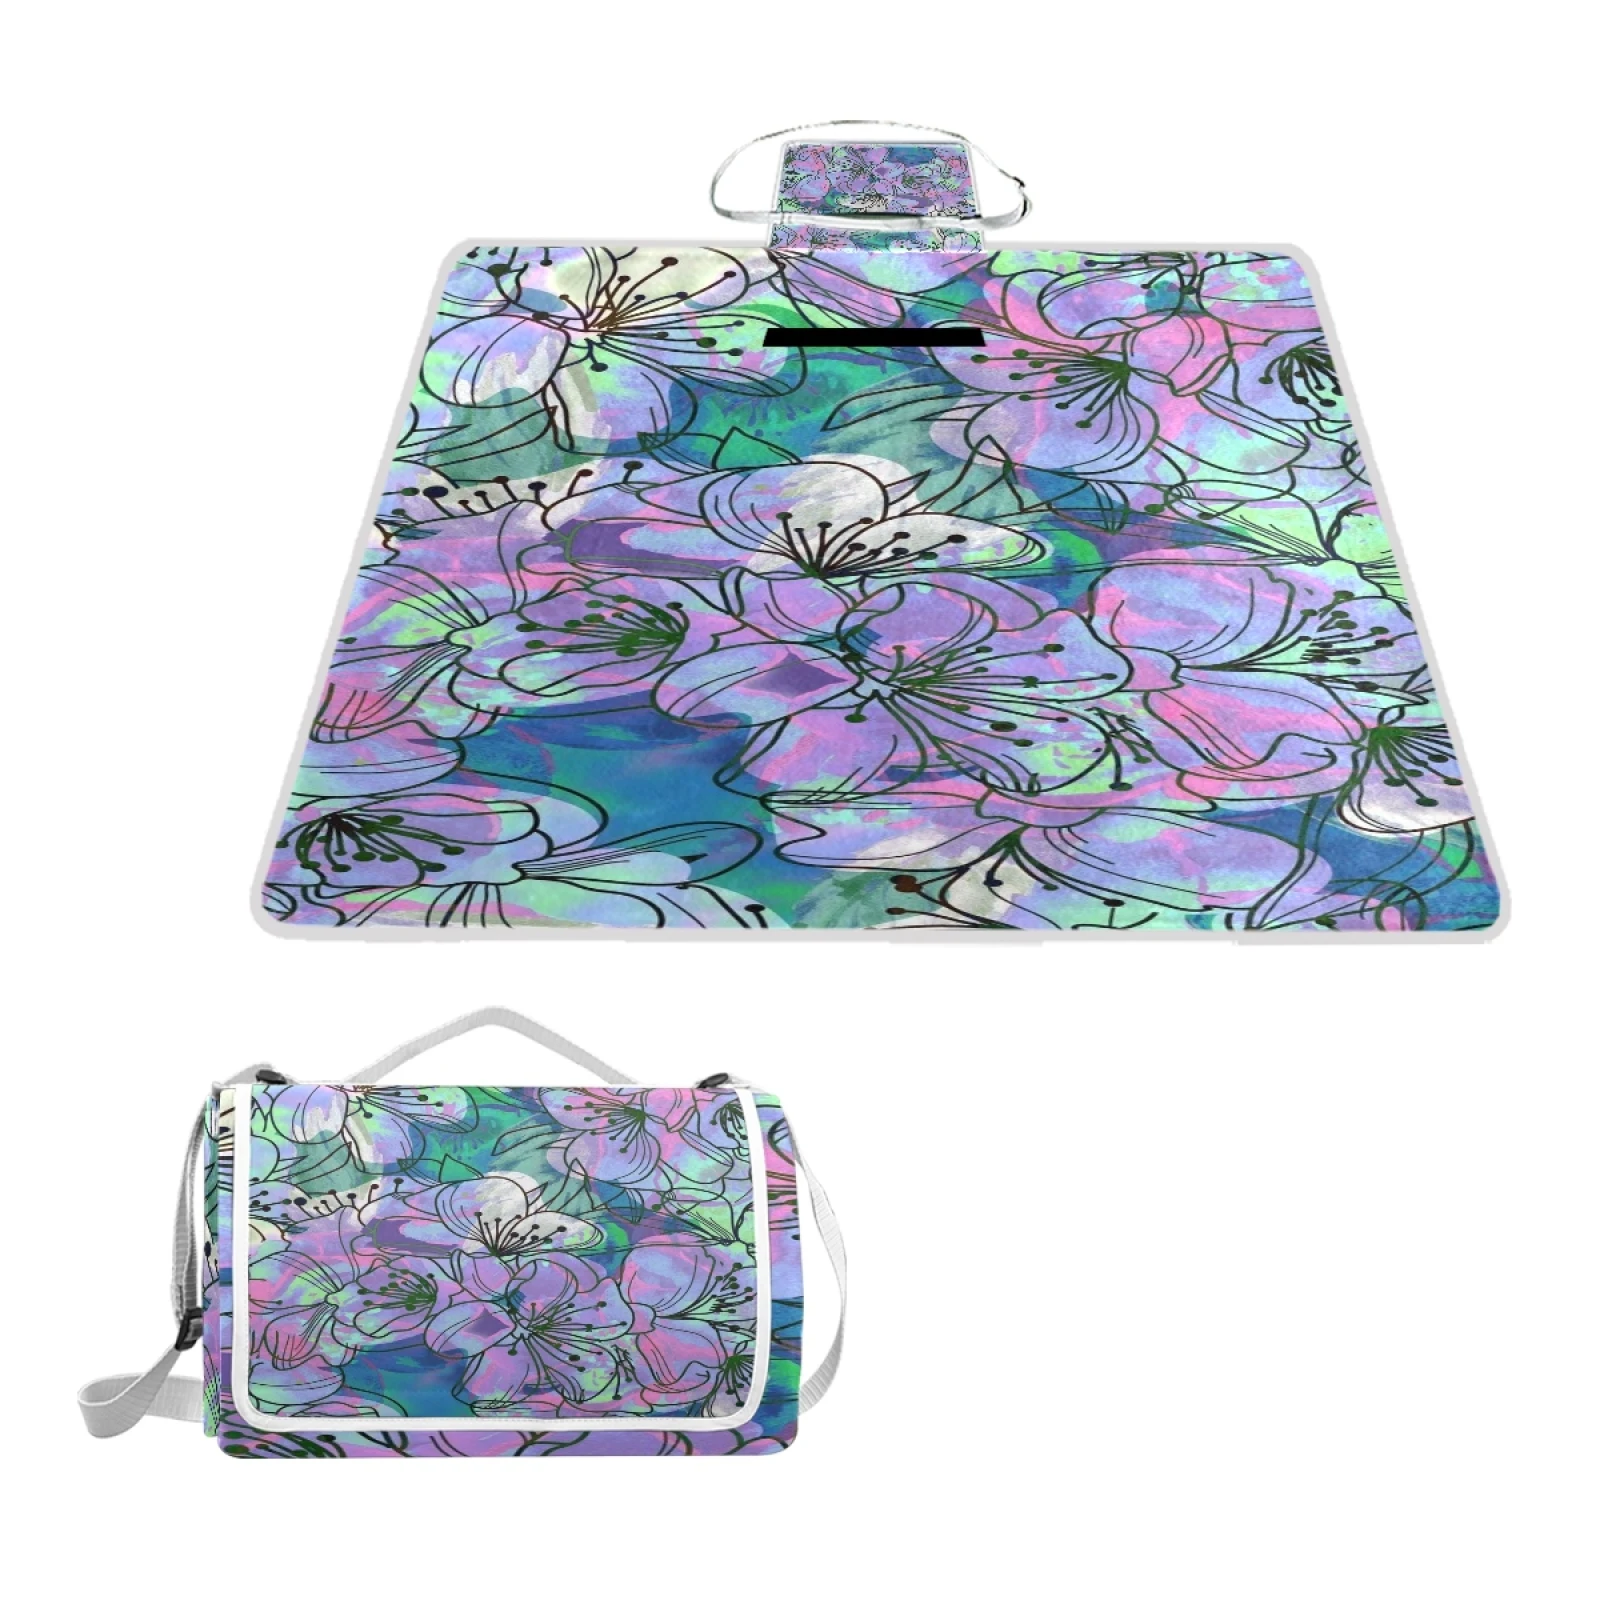 

Colorful Painting Floral Custom Foldable Beach Rug Extra Large Fleece Picnic Blanket Camping Grass Mat